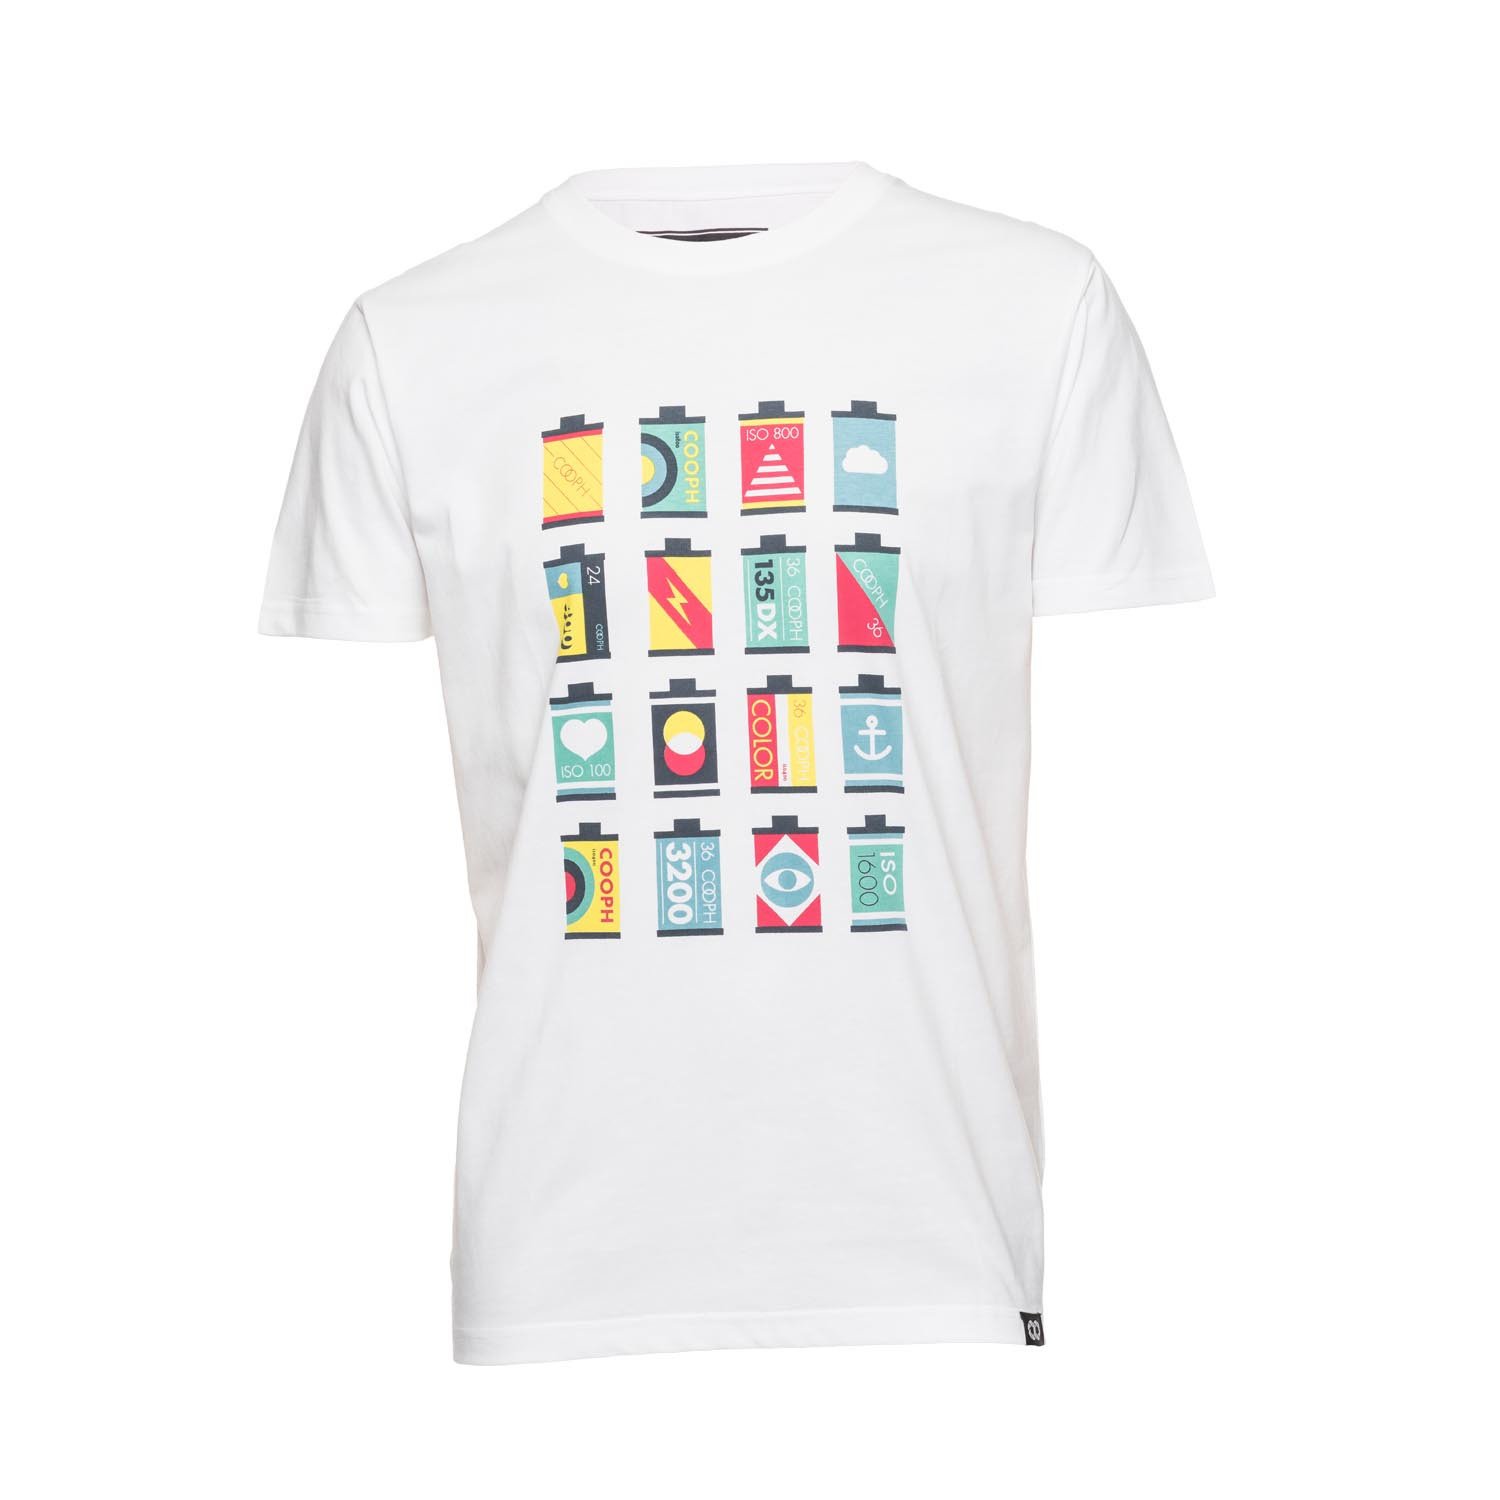 TThumbnail image for COOPH Canisters T-Shirt - White